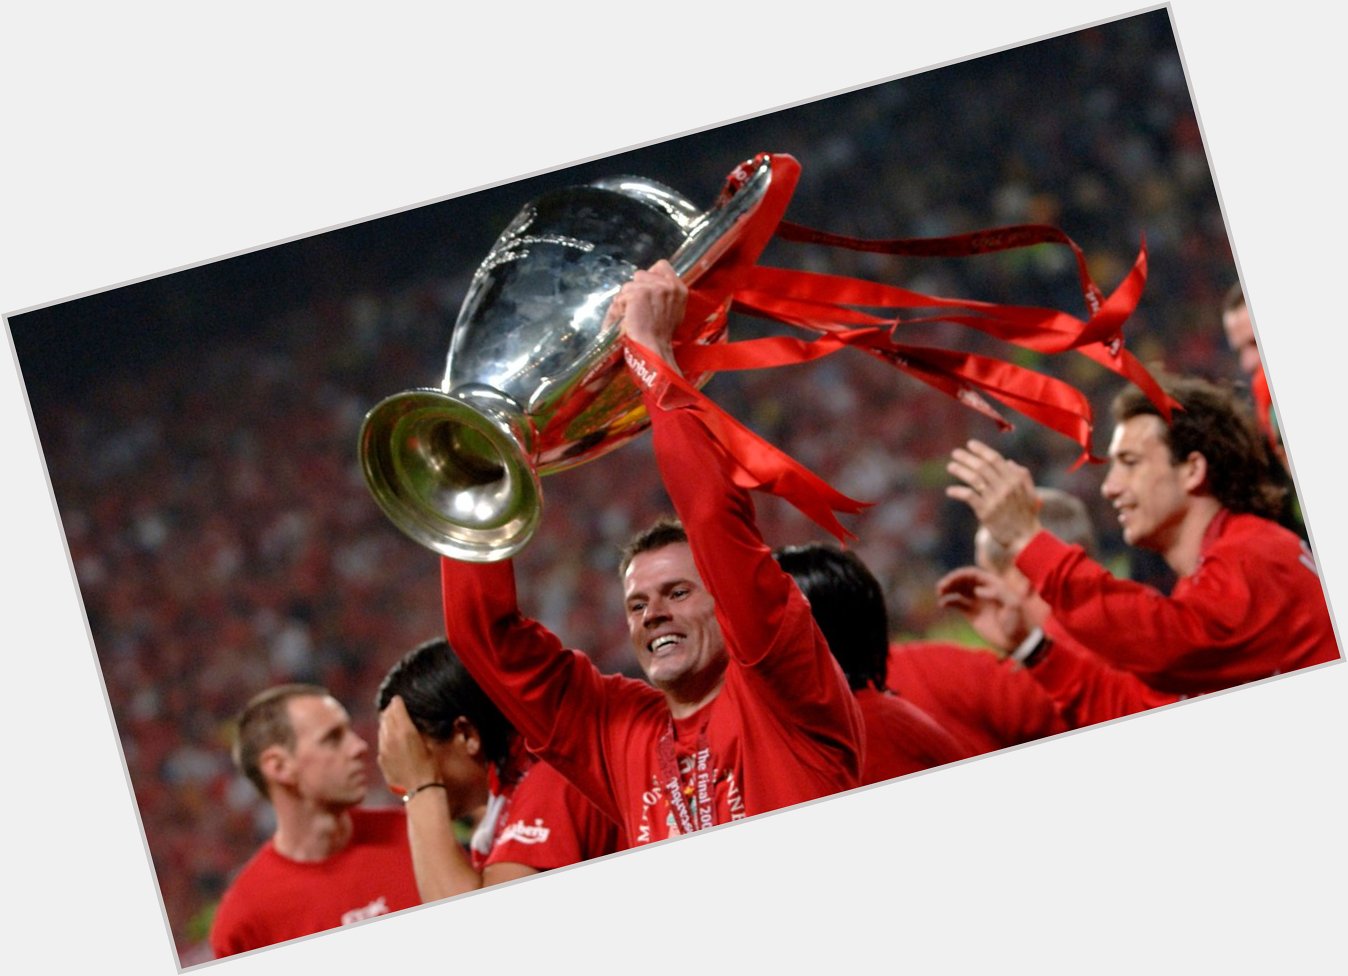 737 appearances over 17 glorious years.

Jamie Carragher IS Liverpool.

Happy 41st birthday,   